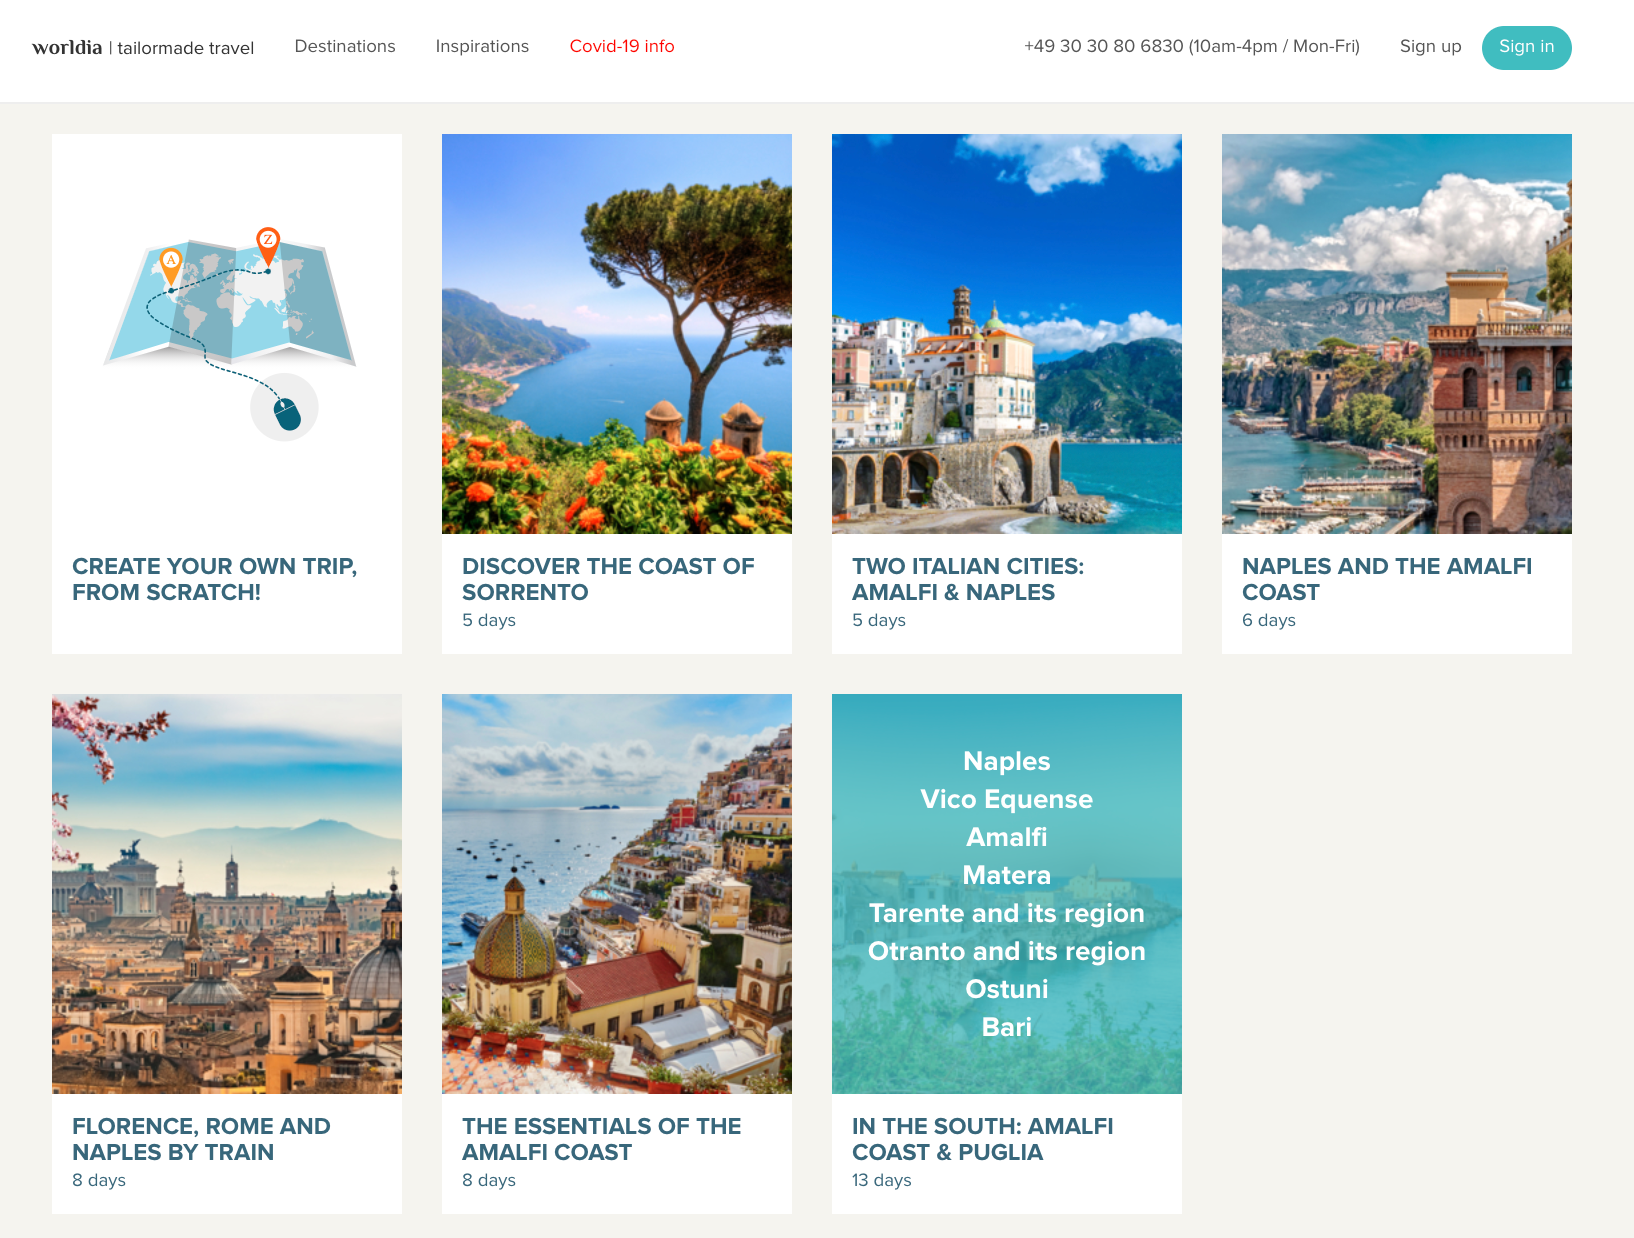 Example 5, 6, 8, and 13-day travel itineraries in Italy